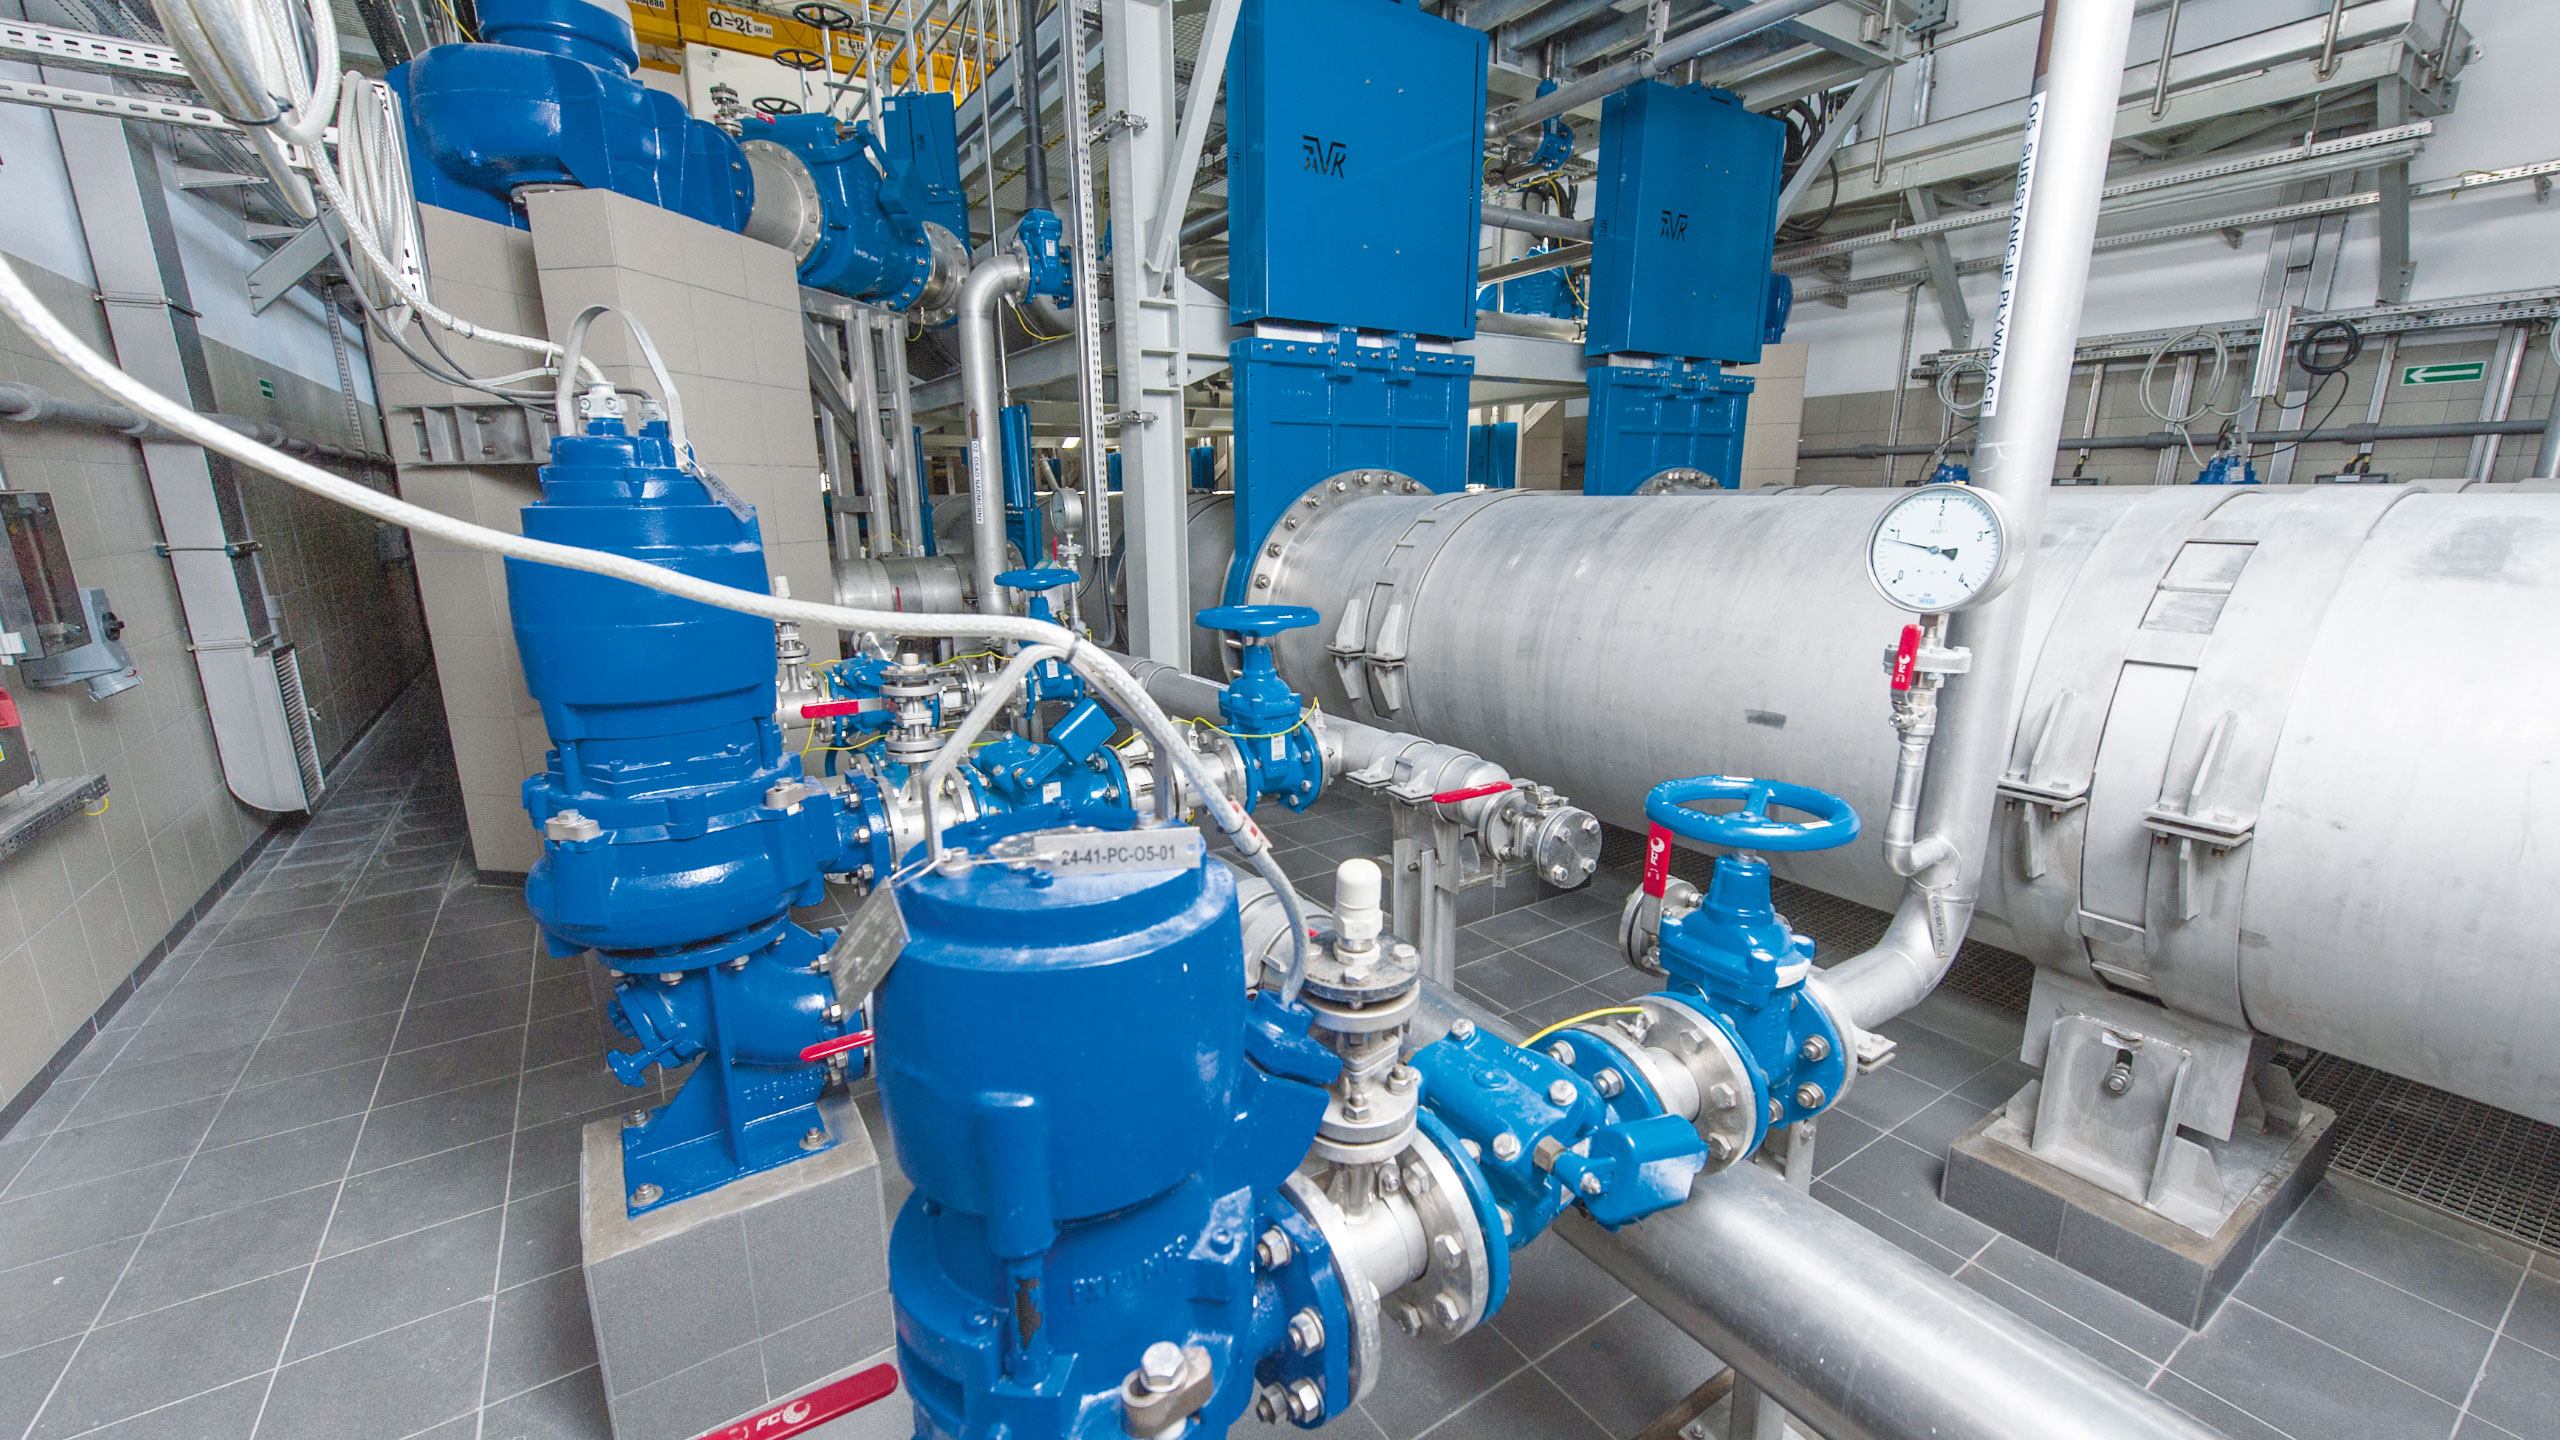 Knife gate valves from AVK installed at Czajka wastewater treatment plant